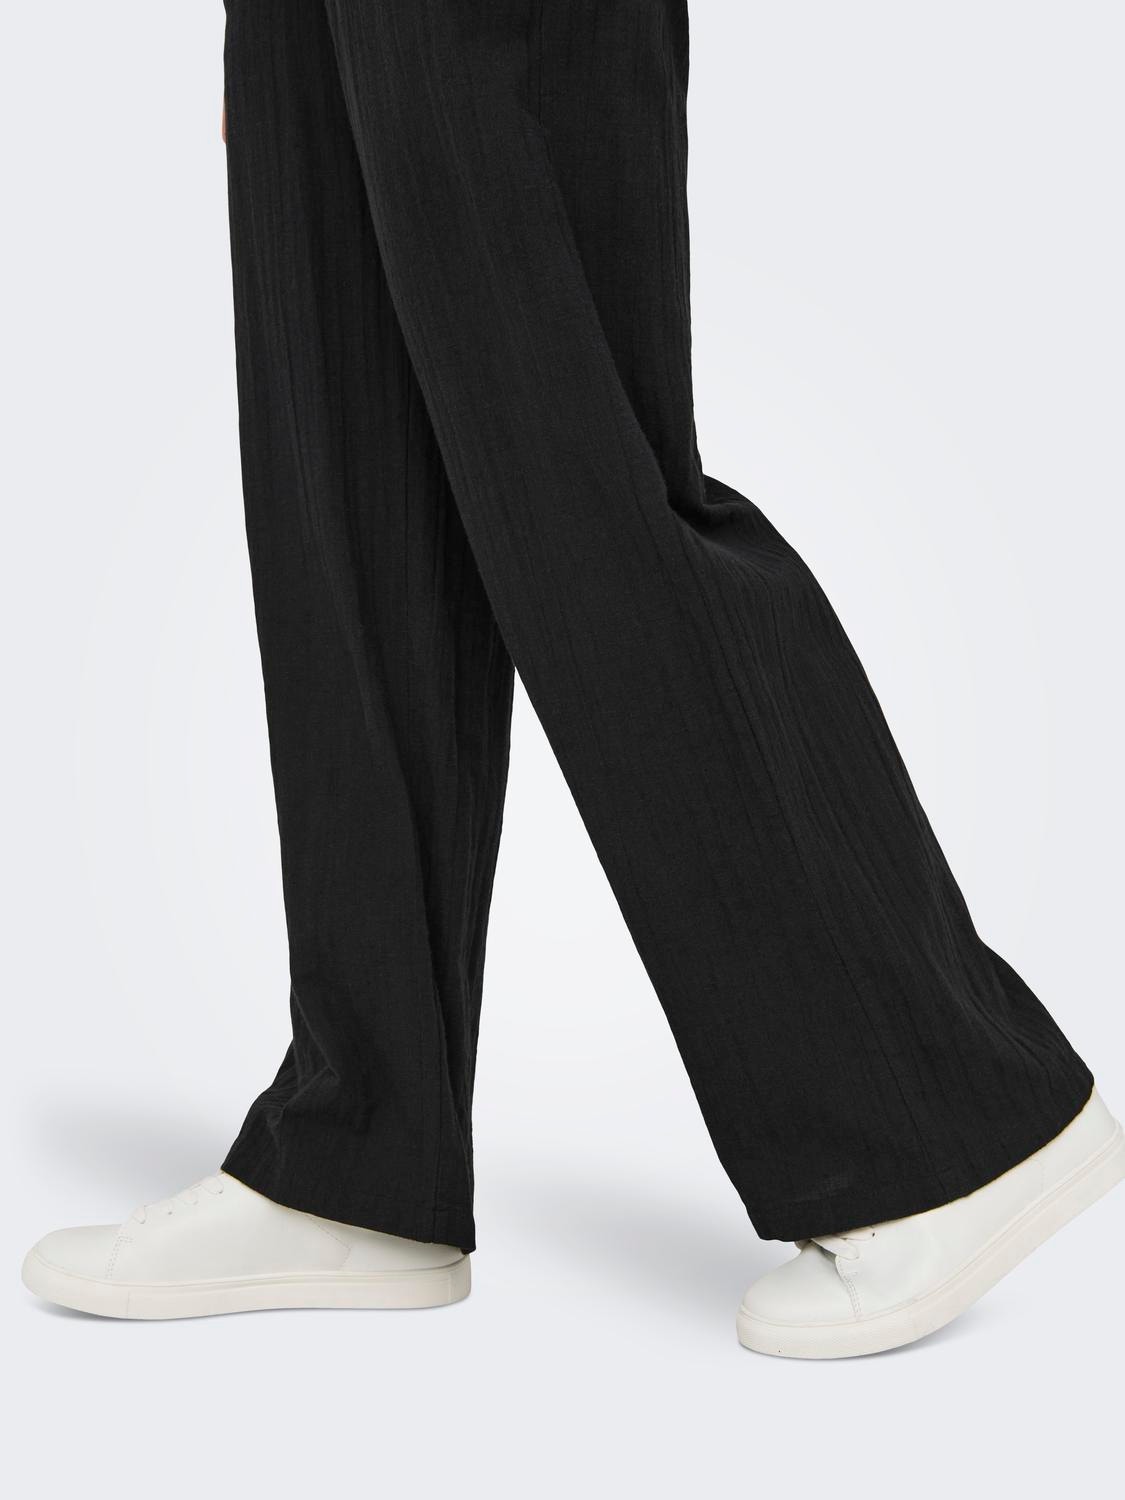 ONLY Regular Fit Trousers -Black - 15319090